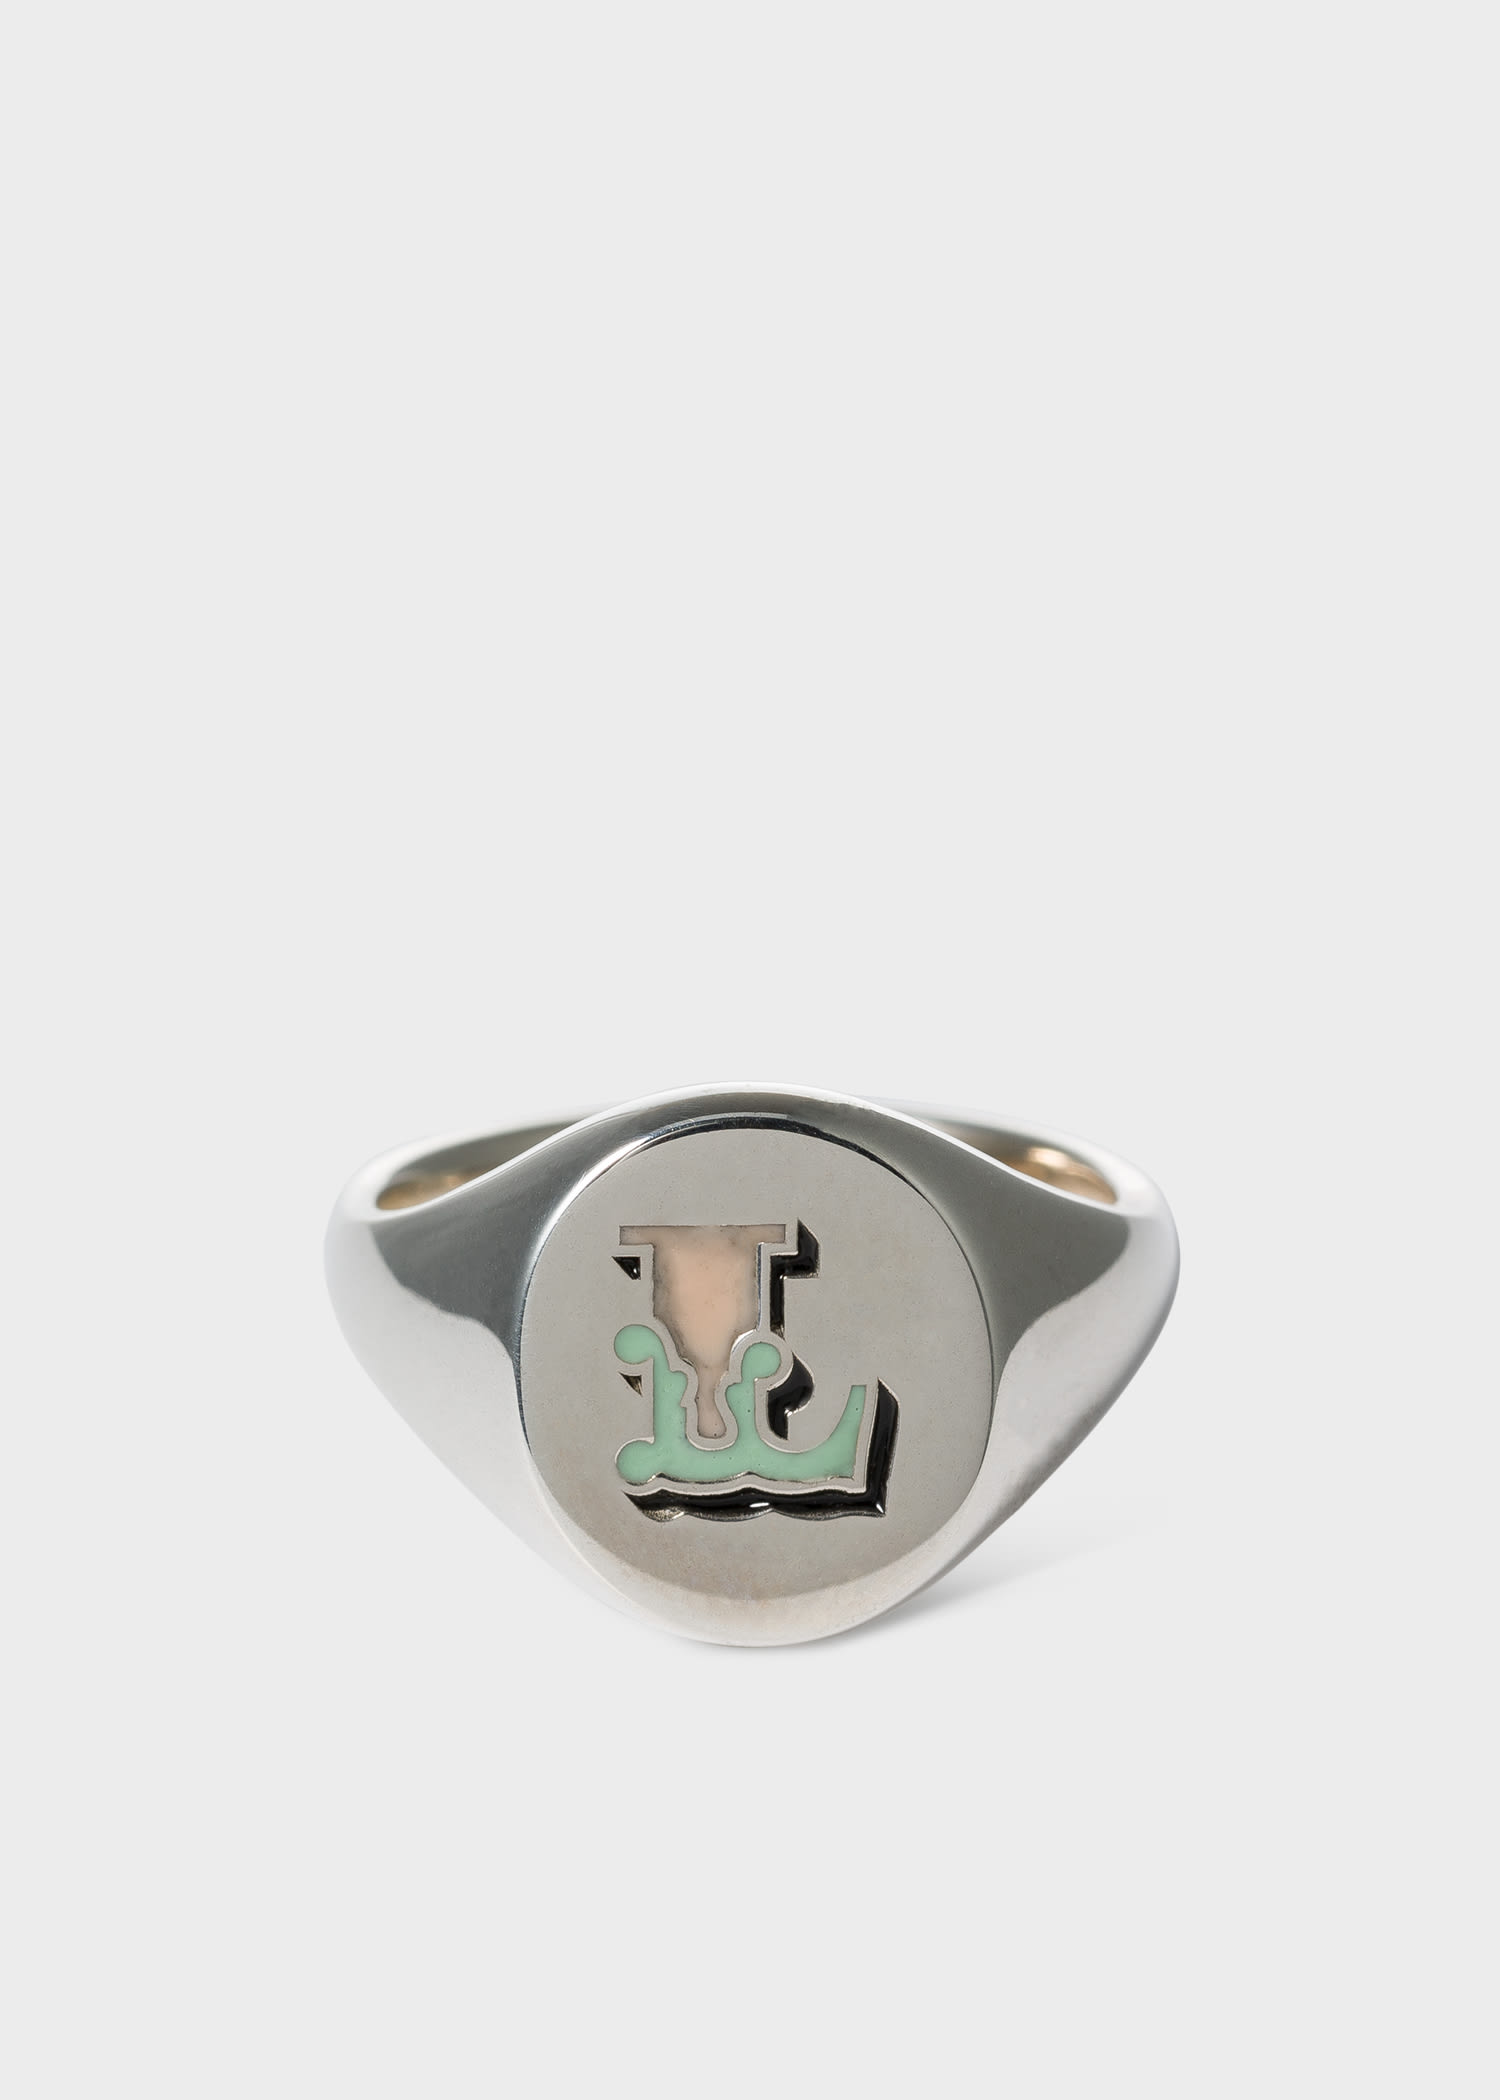 Paul Smith Circus Font Signet Ring